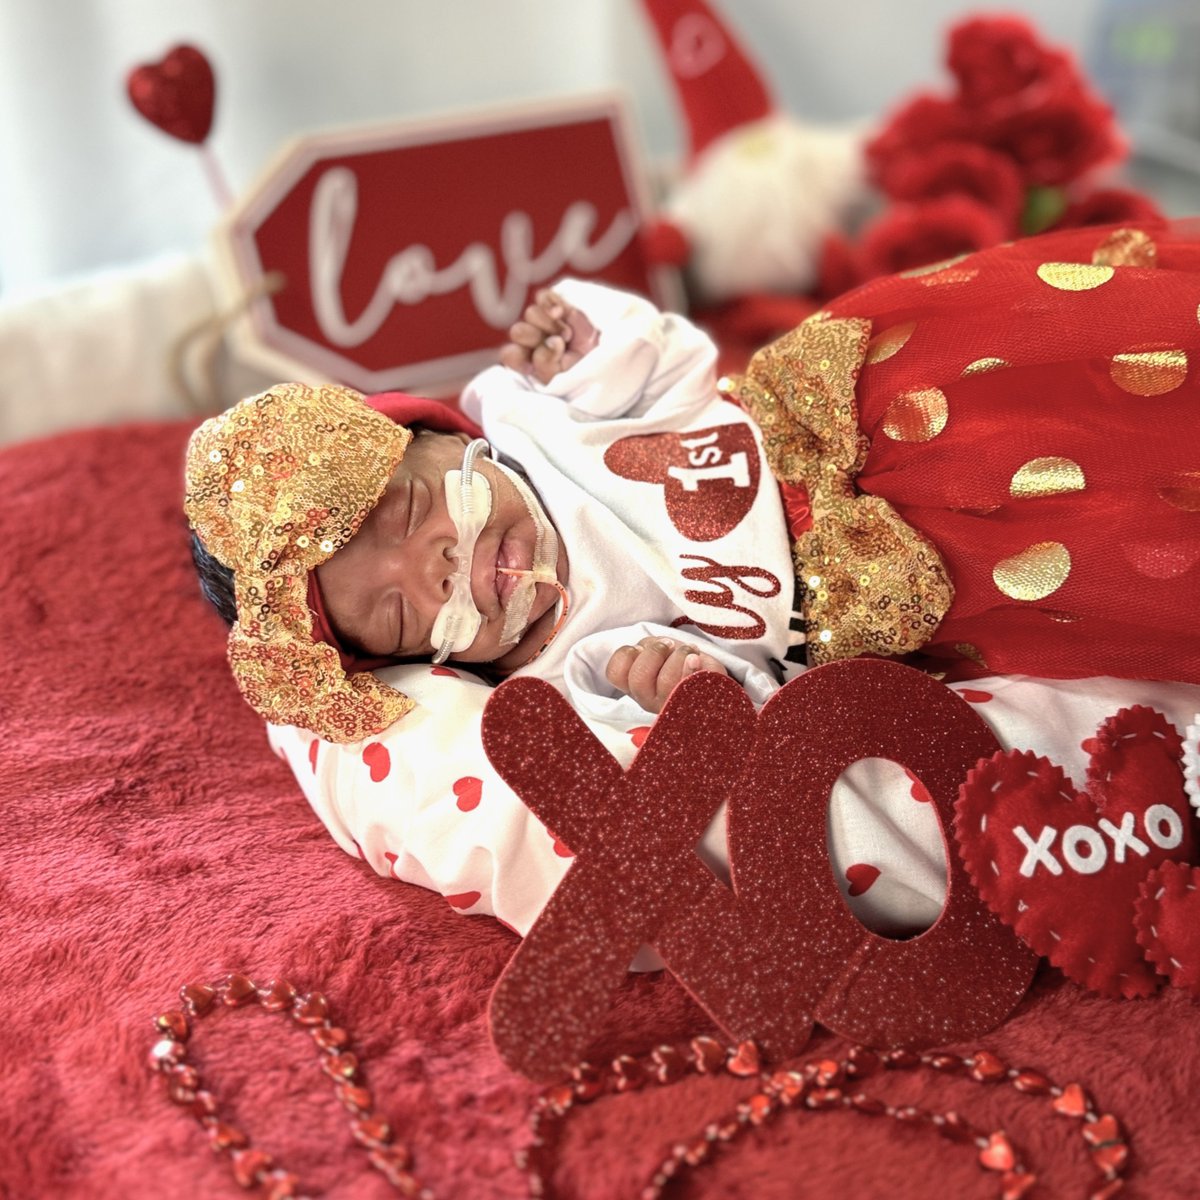 Celebrating their first Valentine’s Day, babies from our NICU at DMC Hutzel Women’s Hospital are bringing love, hope and inspiration into the world. Our care teams extend their heartfelt wishes to the families with babies in their care. #NICU #ValentinesDay